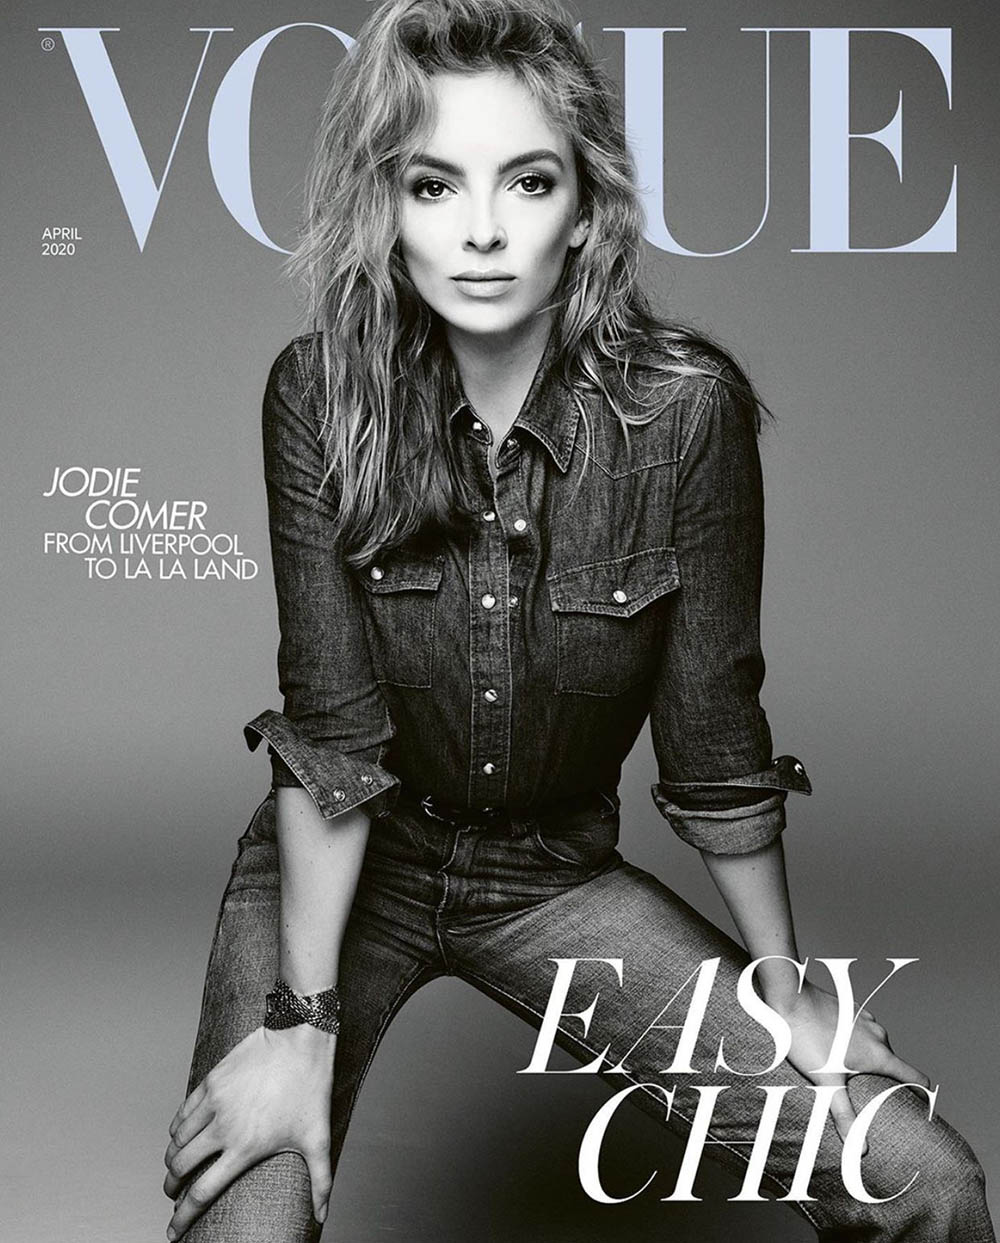 Jodie Comer covers British Vogue April 2020 by Steven Meisel